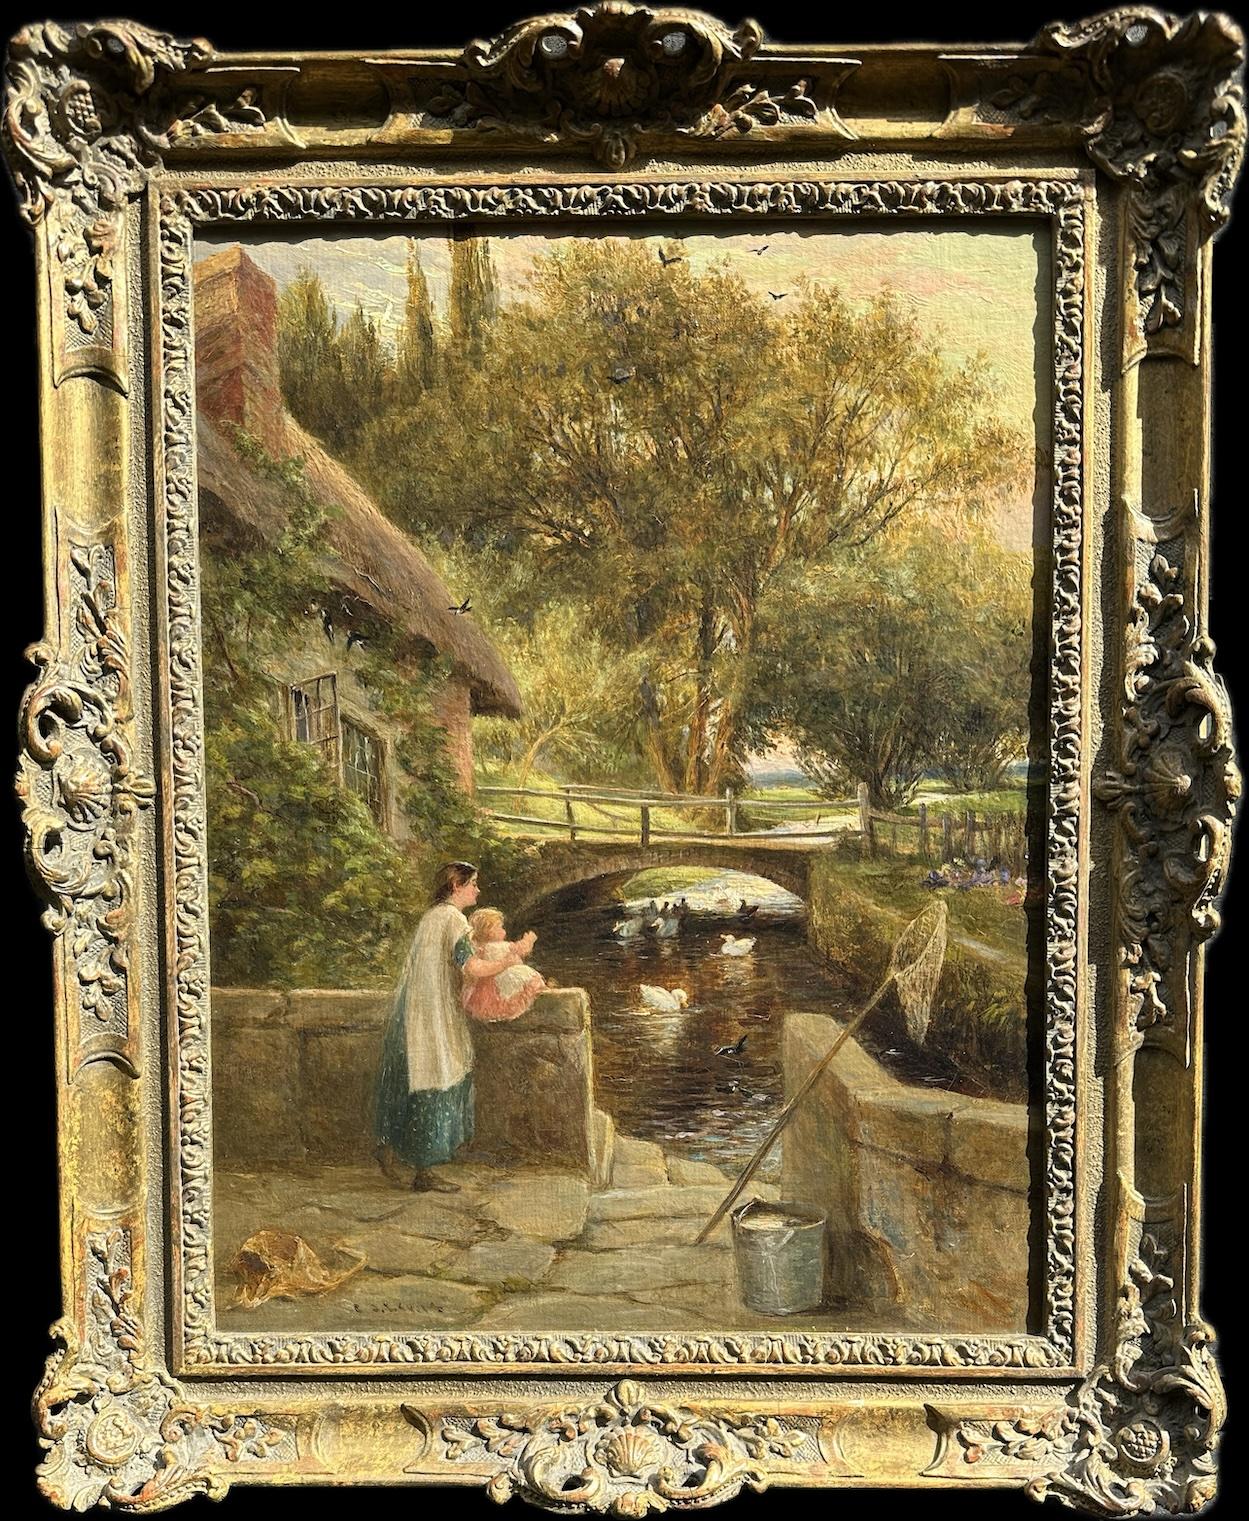 English landscape 19th century Mother and child by a cottage, looking at Ducks 